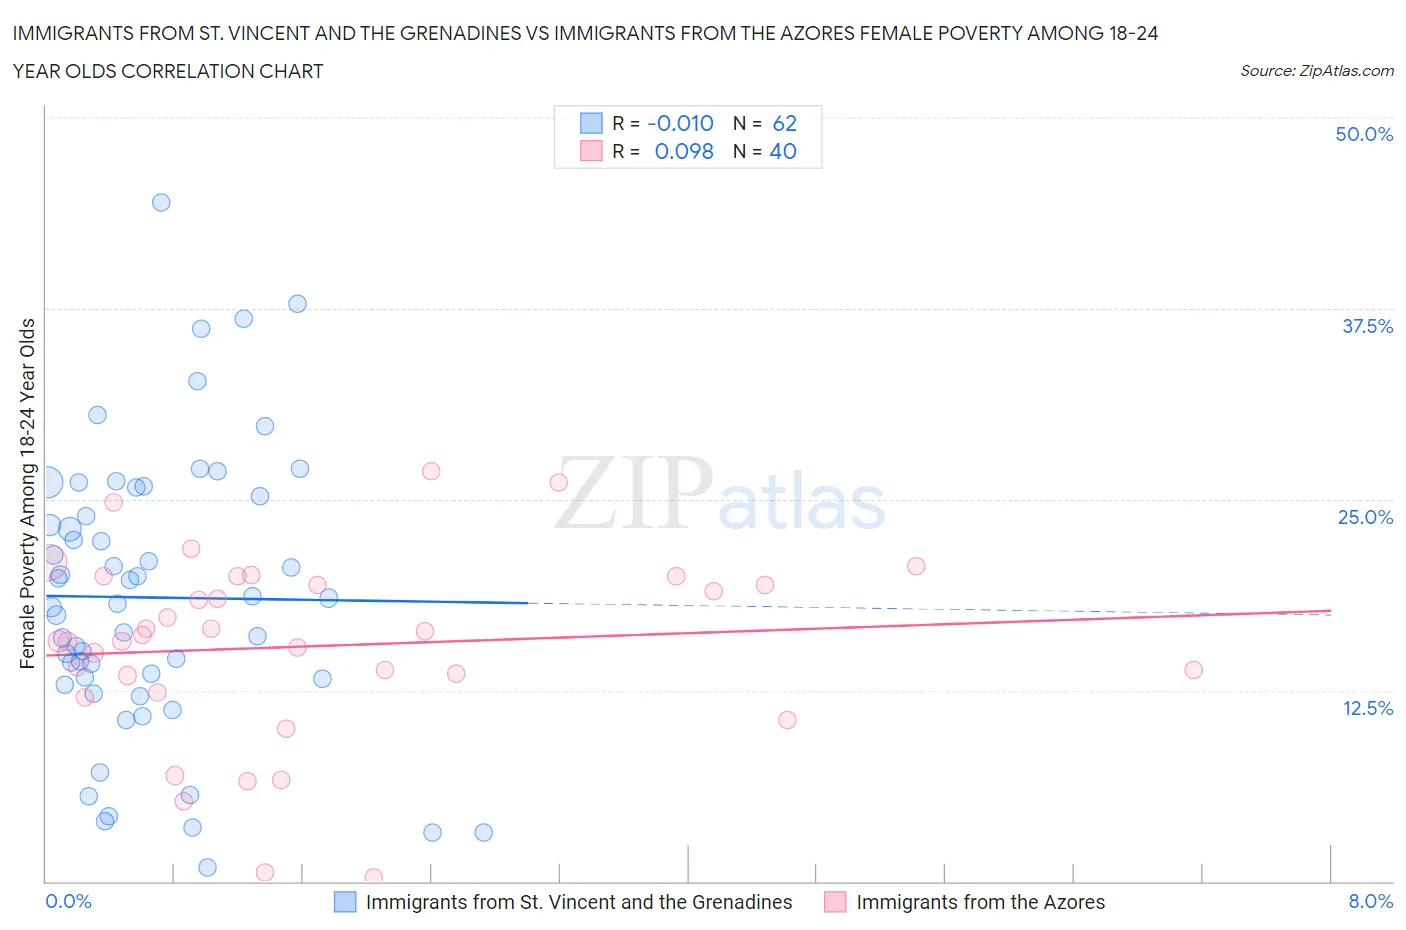 Immigrants from St. Vincent and the Grenadines vs Immigrants from the Azores Female Poverty Among 18-24 Year Olds